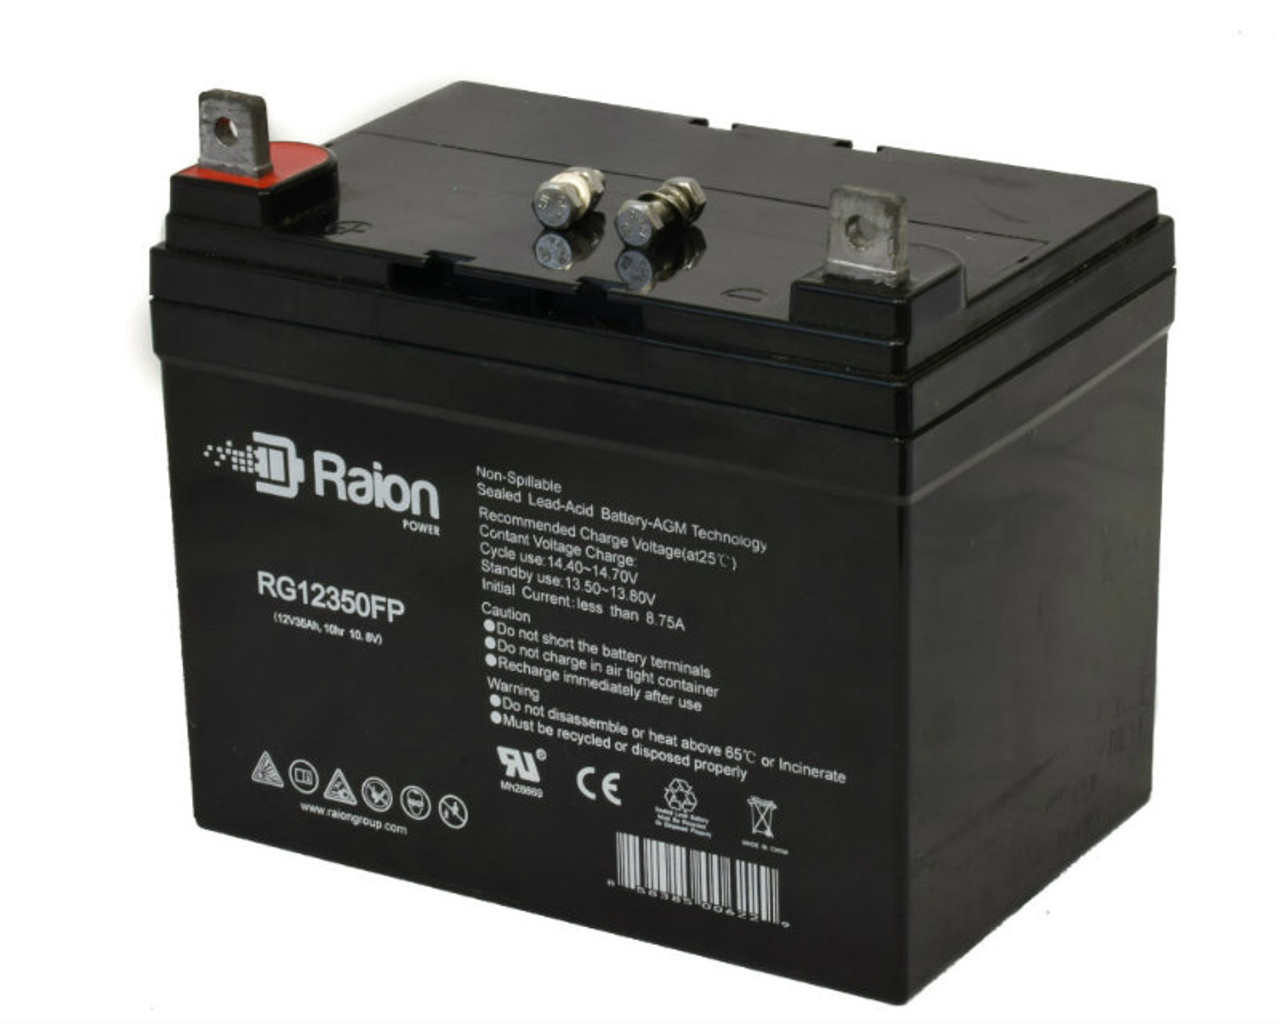 Raion Power Replacement 12V 35Ah Battery for GFX NP35-12 - 1 Pack